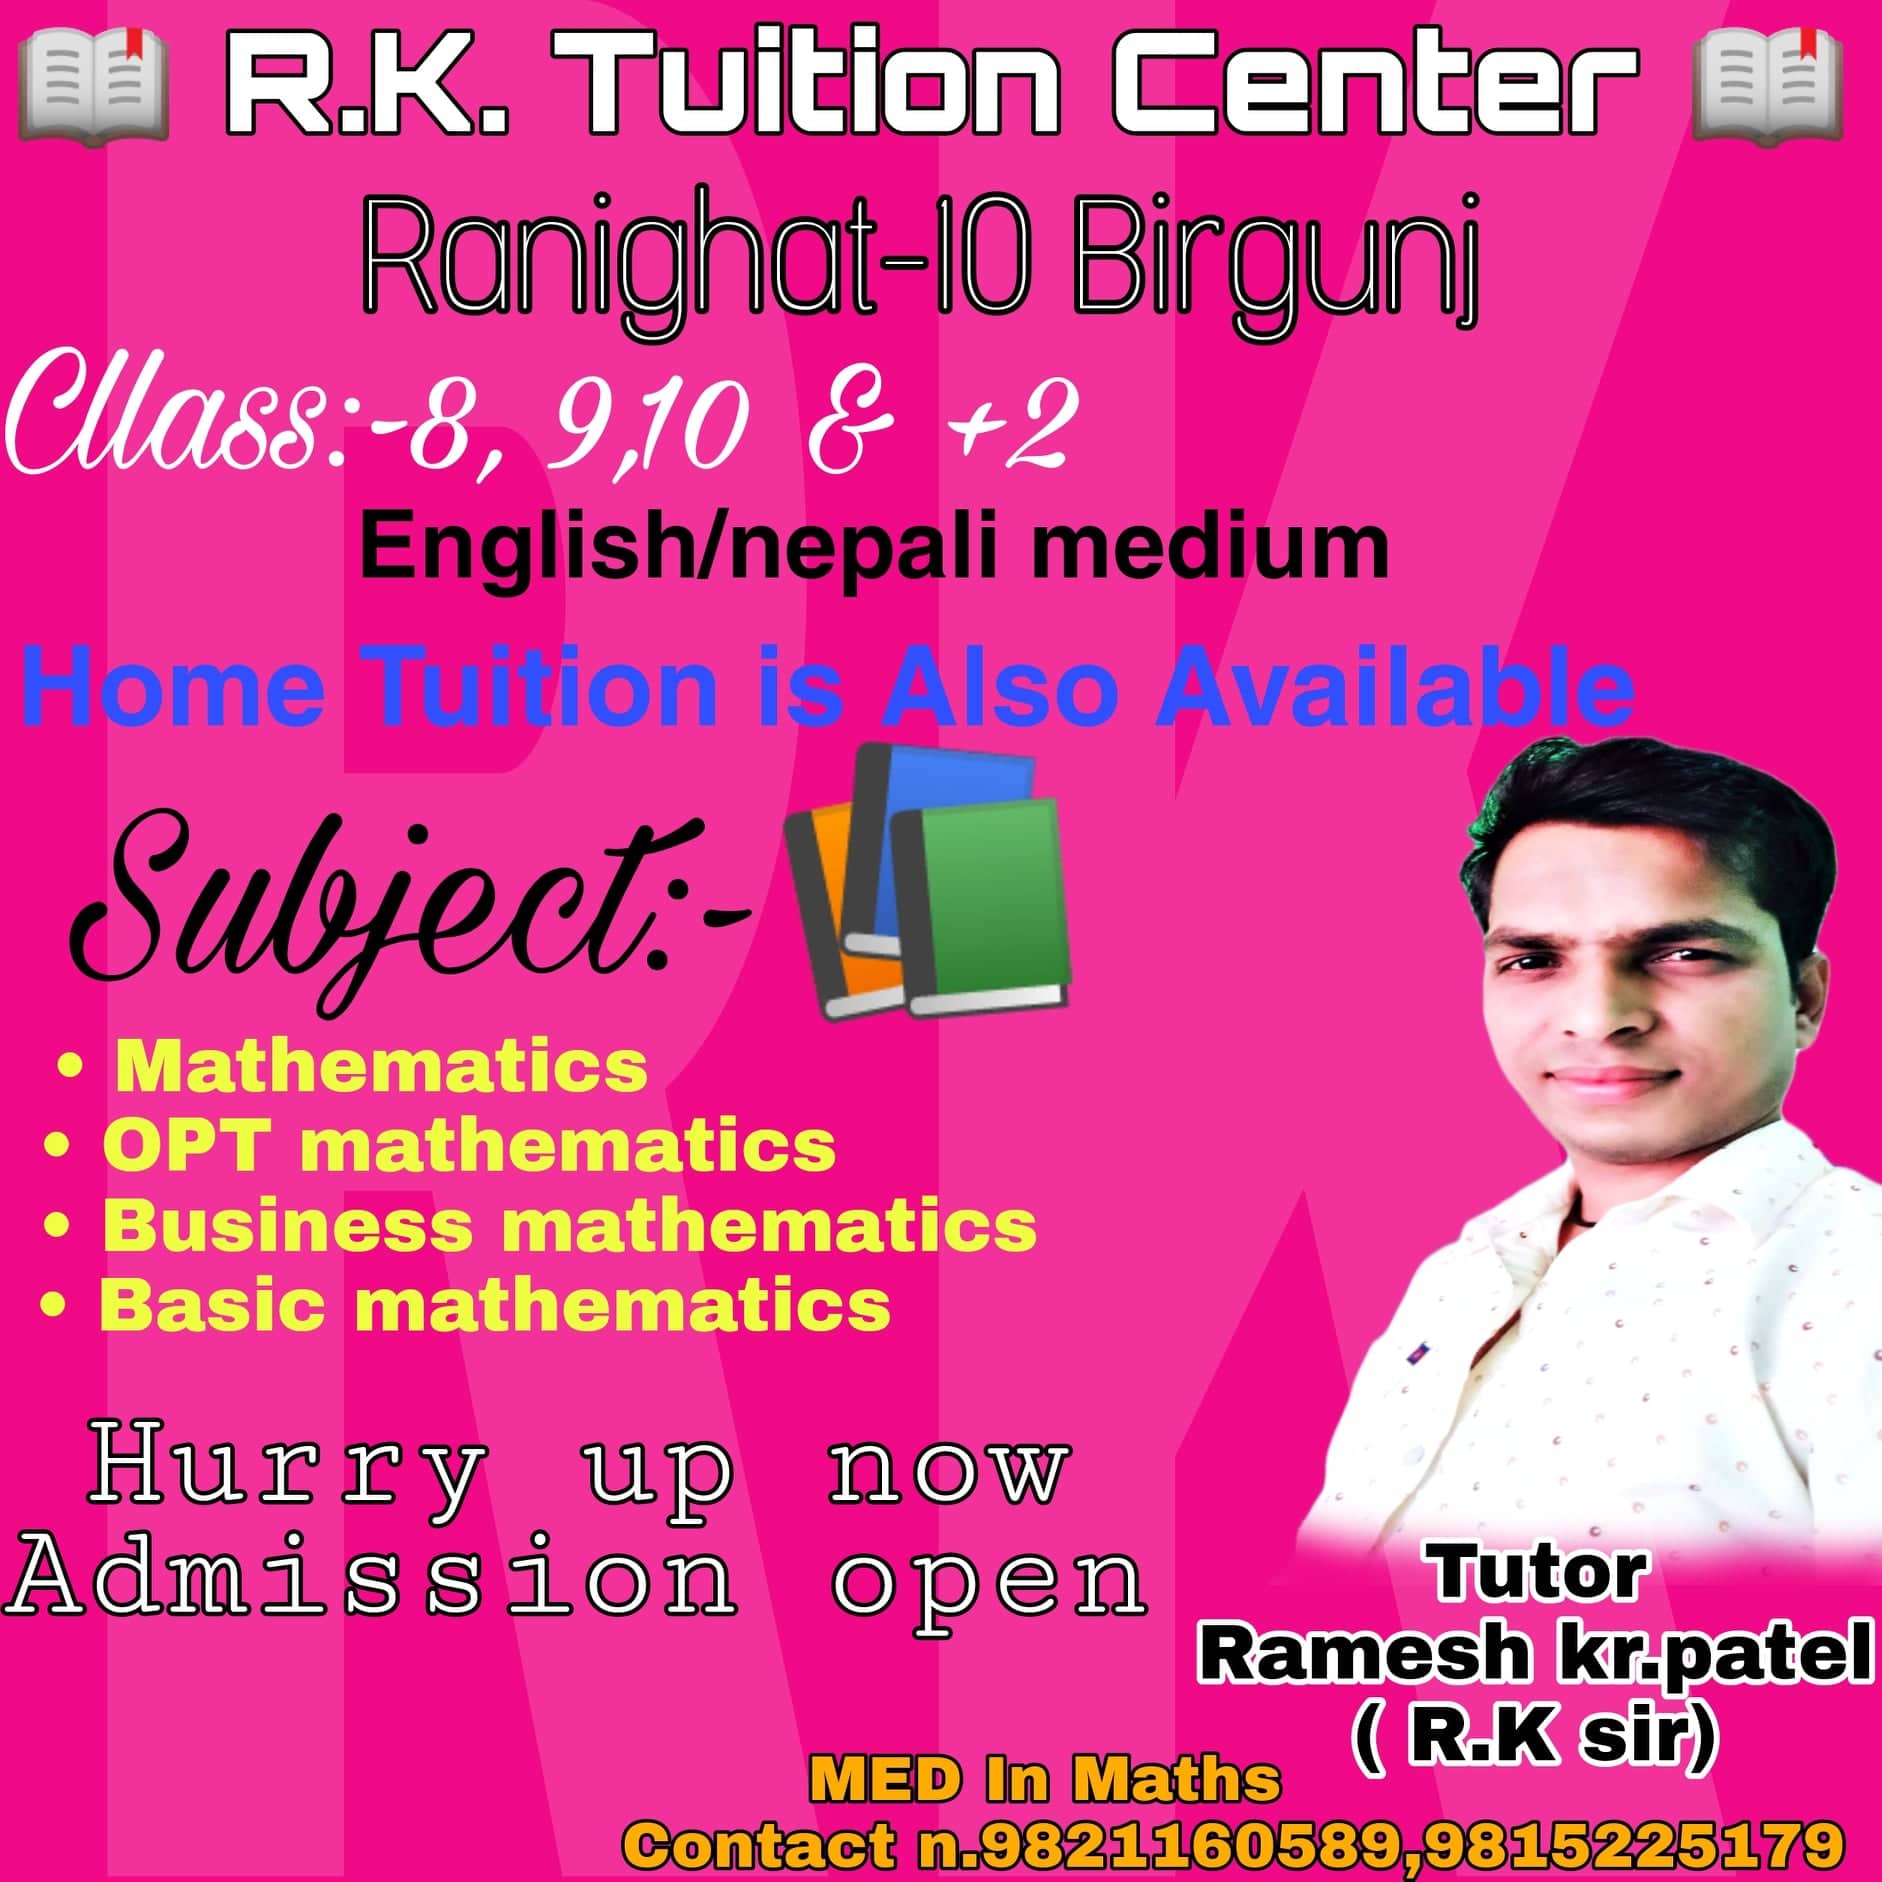 Rk tuition Center